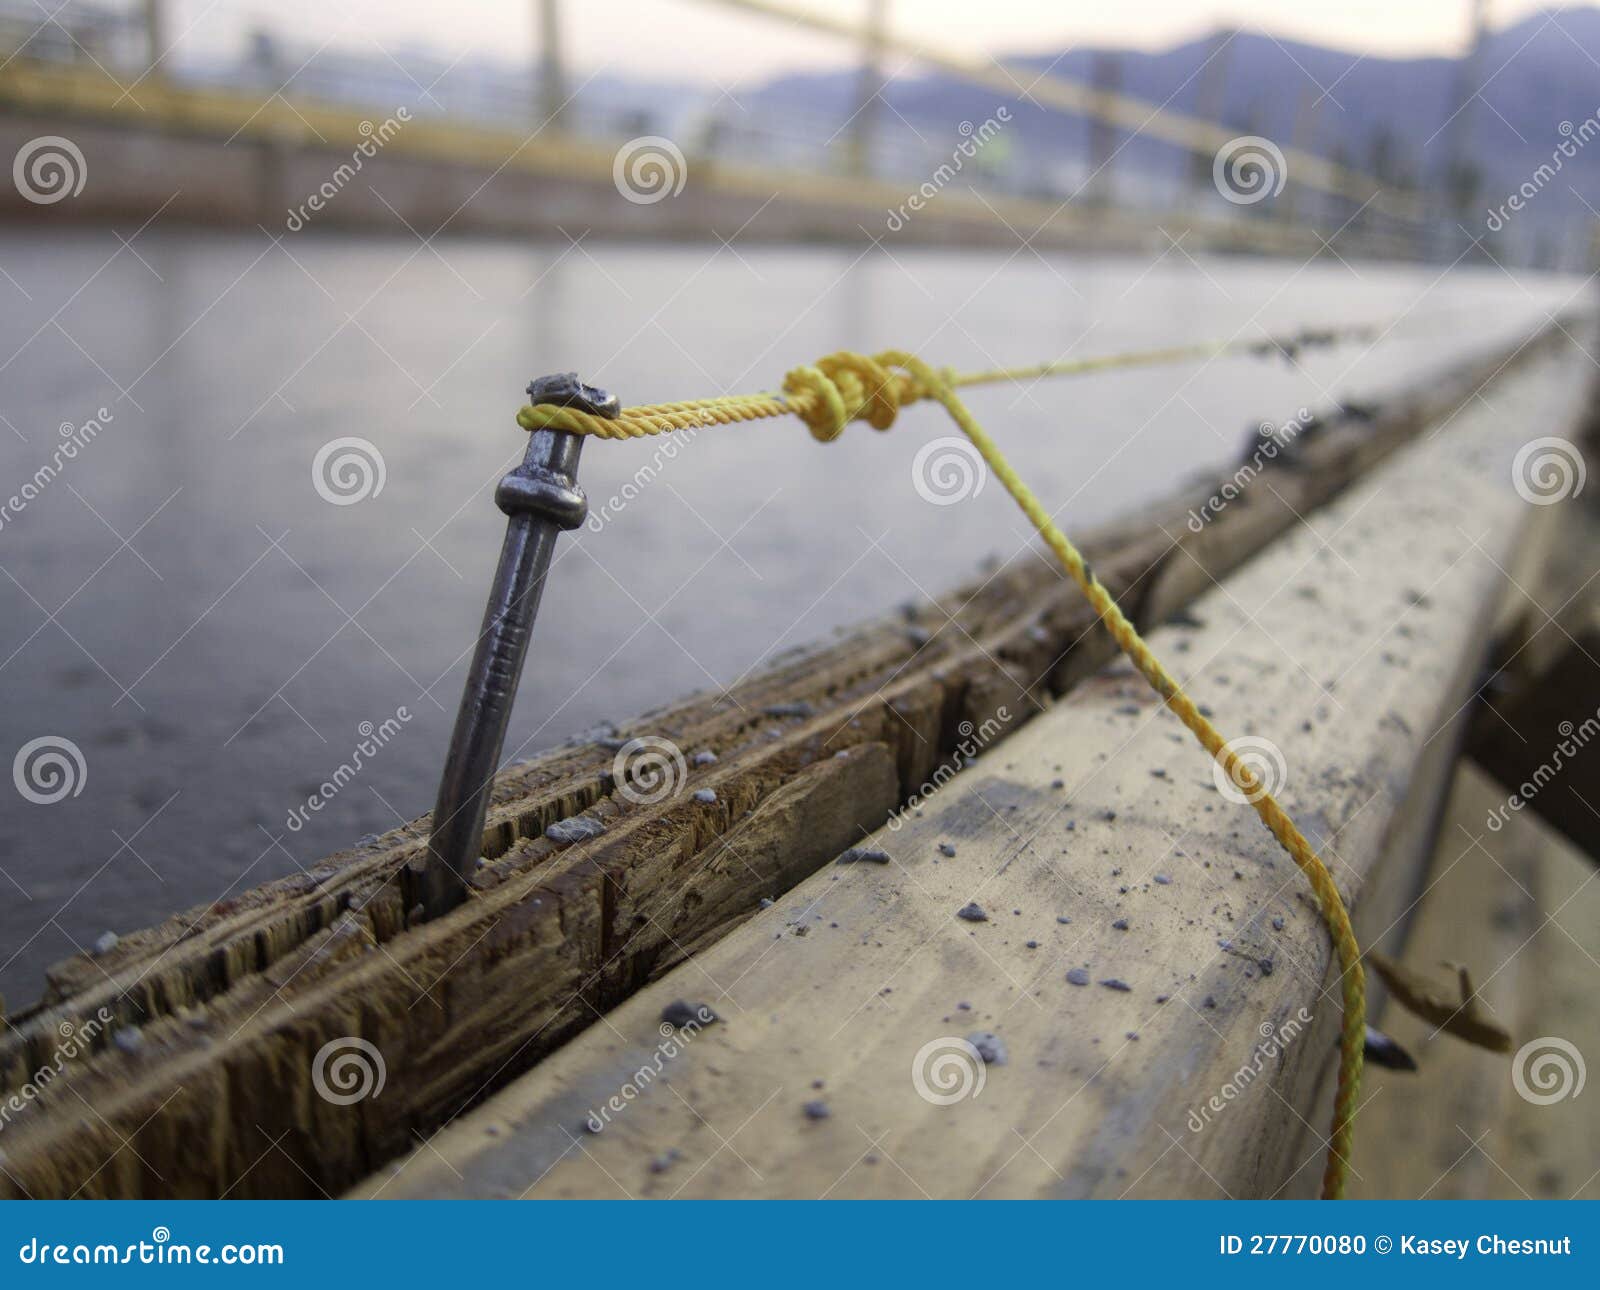 String line nail concrete stock photo. Image of perspective - 27770080